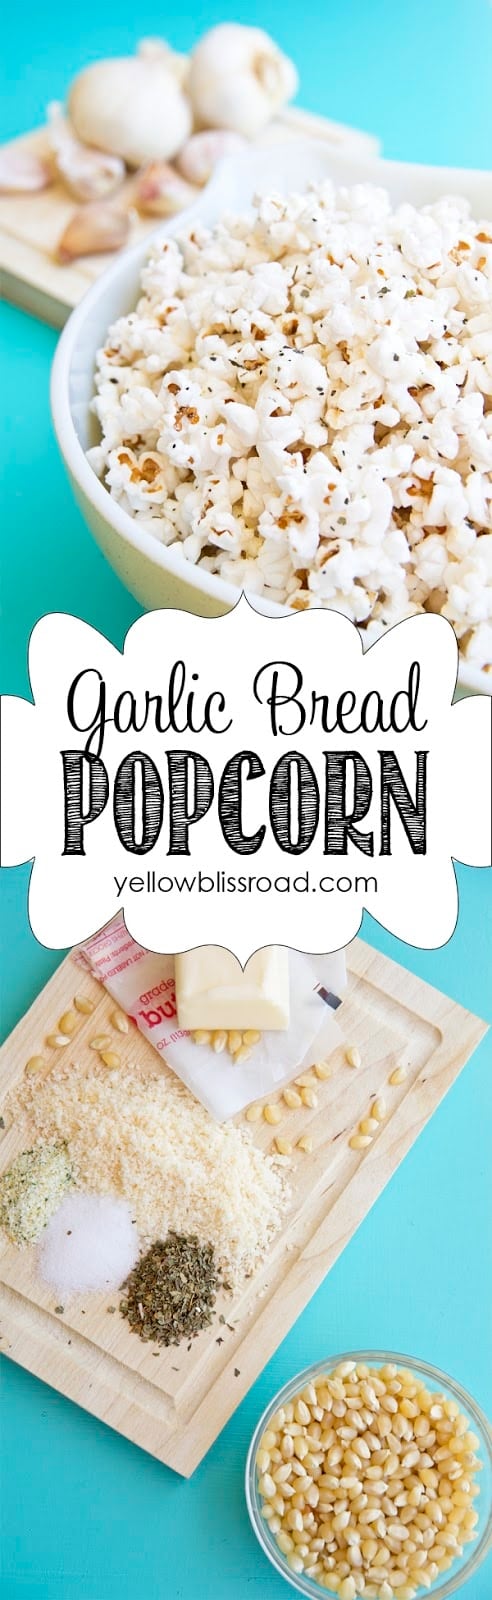 A warm, delicious, garlicky treat. This garlic bread popcorn is so easy and perfect for a fall movie night!